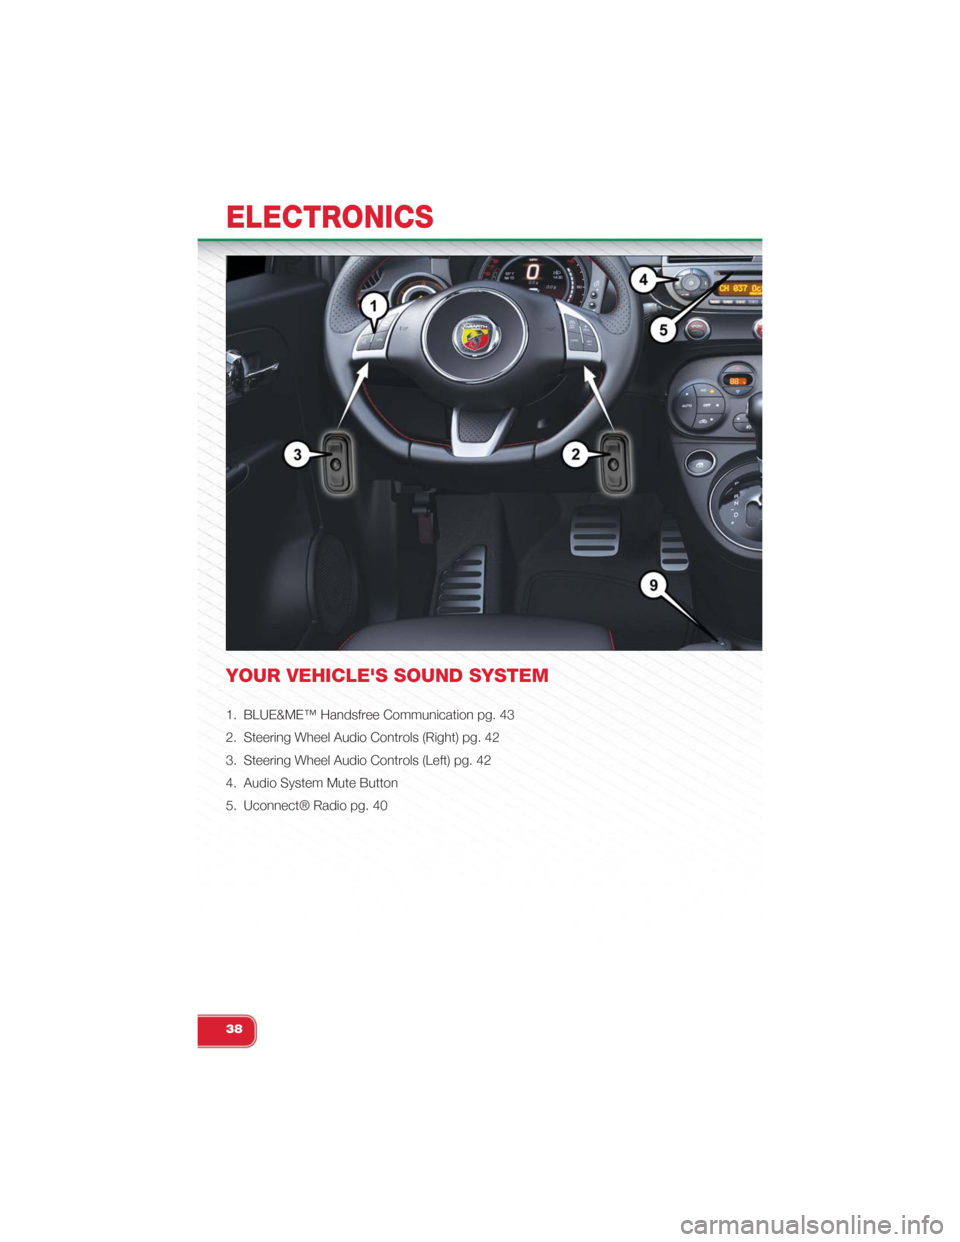 FIAT 500 ABARTH 2015 2.G User Guide YOUR VEHICLES SOUND SYSTEM
1. BLUE&ME™ Handsfree Communication pg. 43
2. Steering Wheel Audio Controls (Right) pg. 42
3. Steering Wheel Audio Controls (Left) pg. 42
4. Audio System Mute Button
5. U